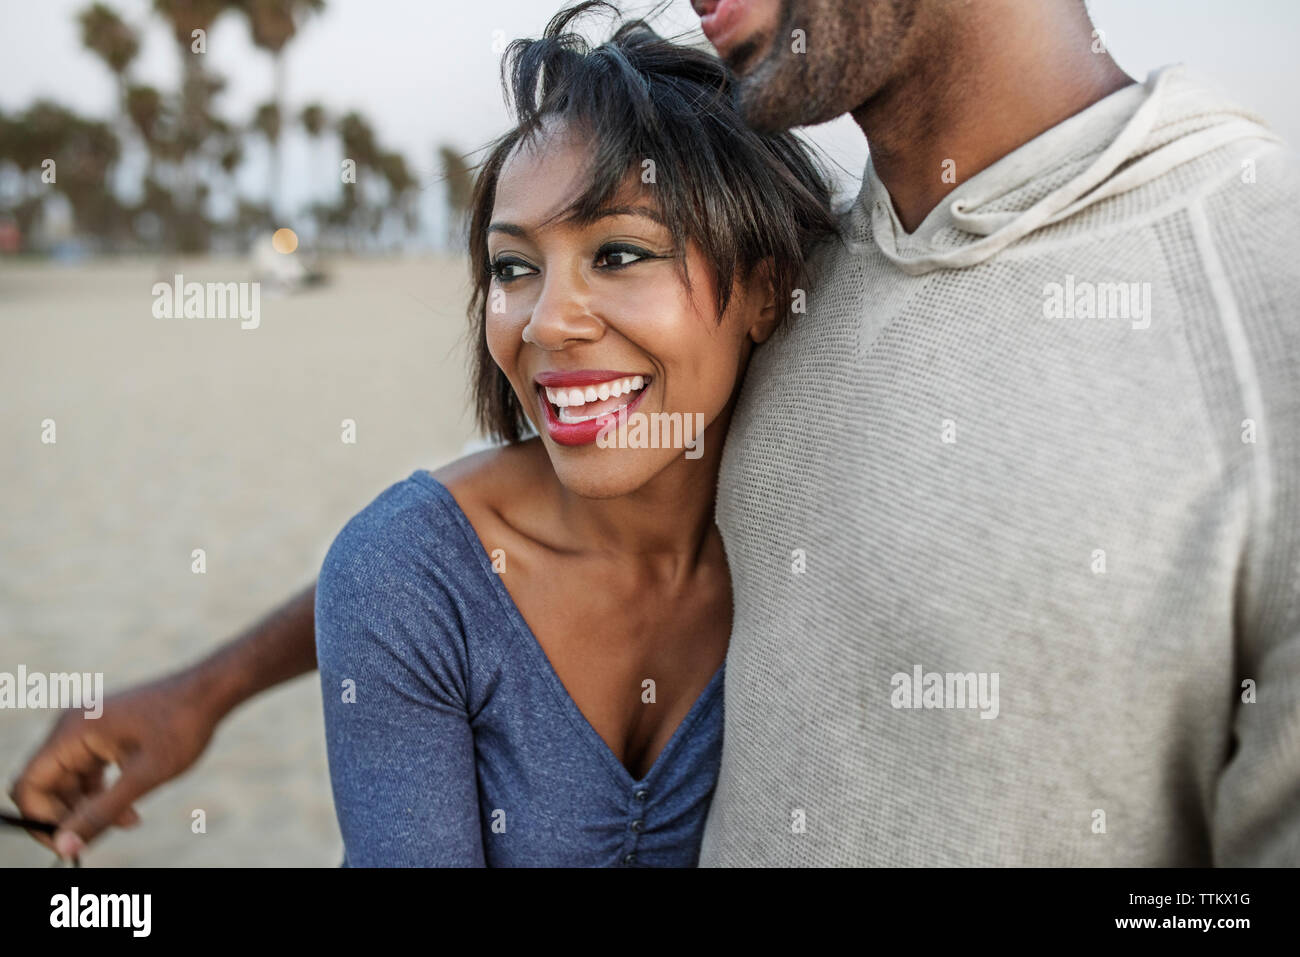 Happy woman embracing man at beach Banque D'Images